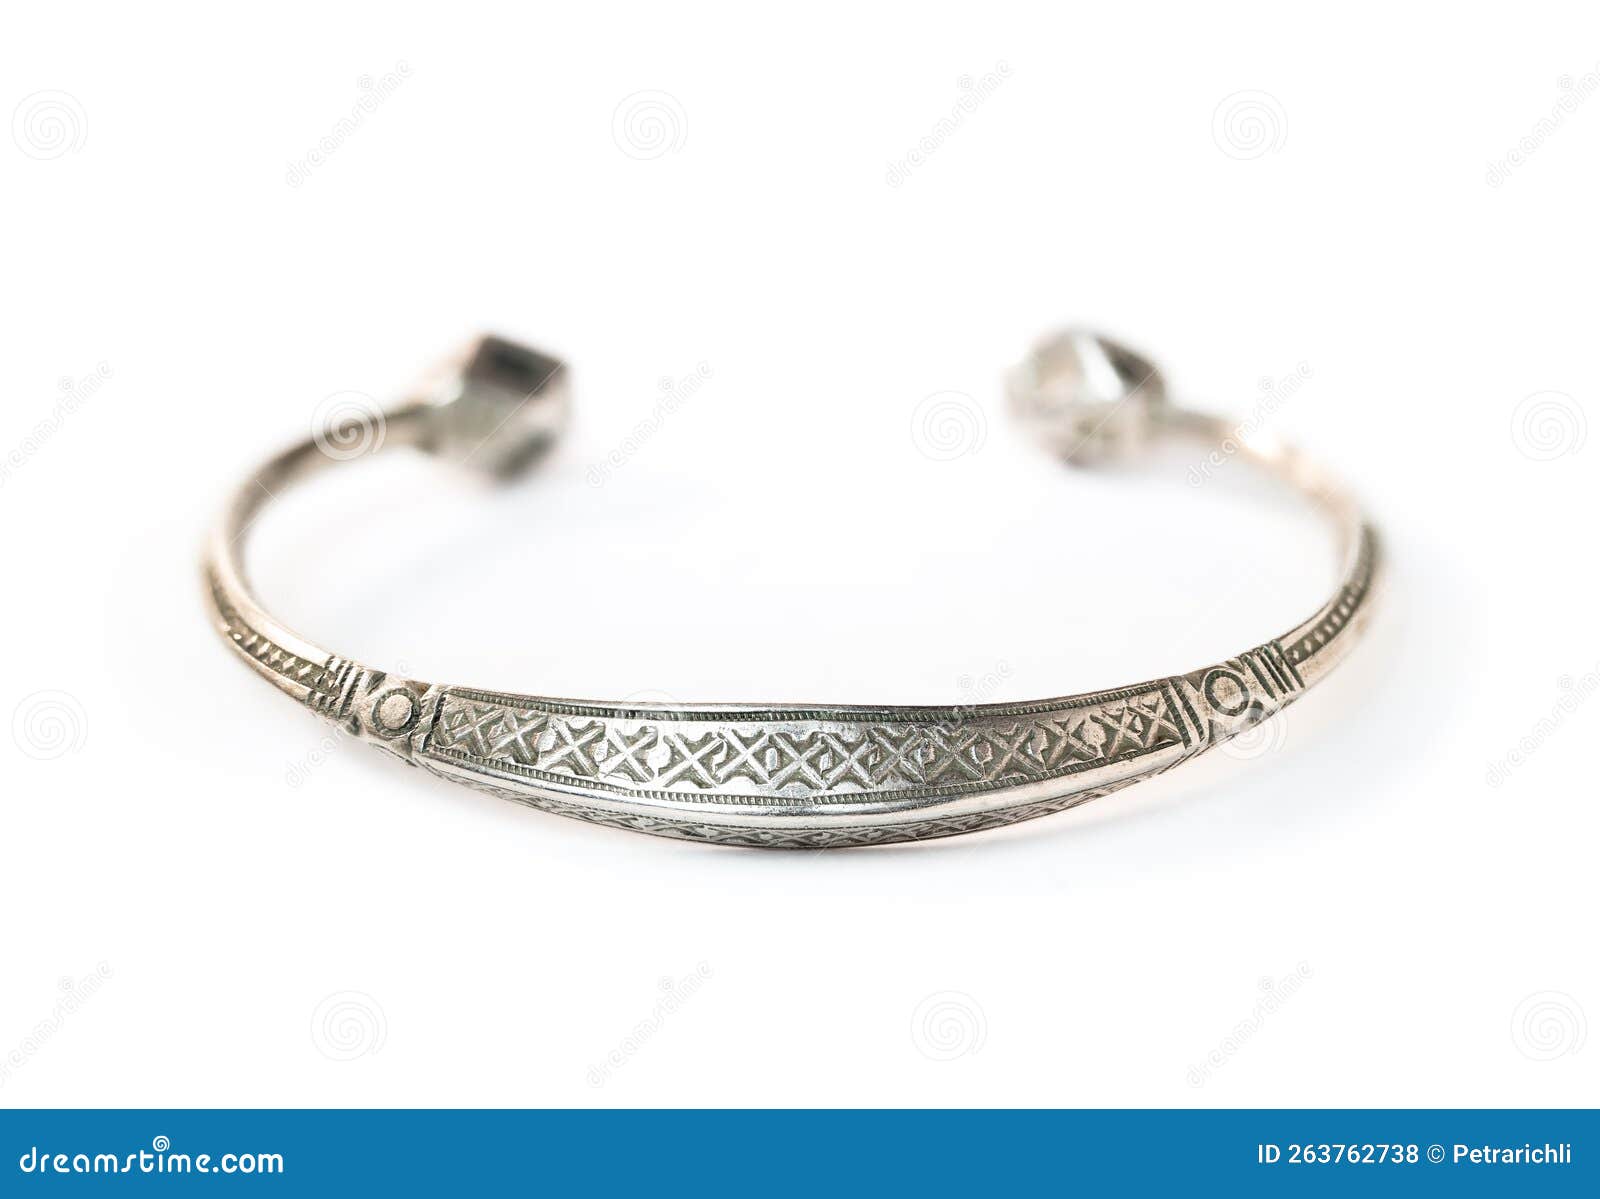 isolated celtic wrist bracelet perspective view old small silver wrist torc engraved pattern viking jewelry female 263762738